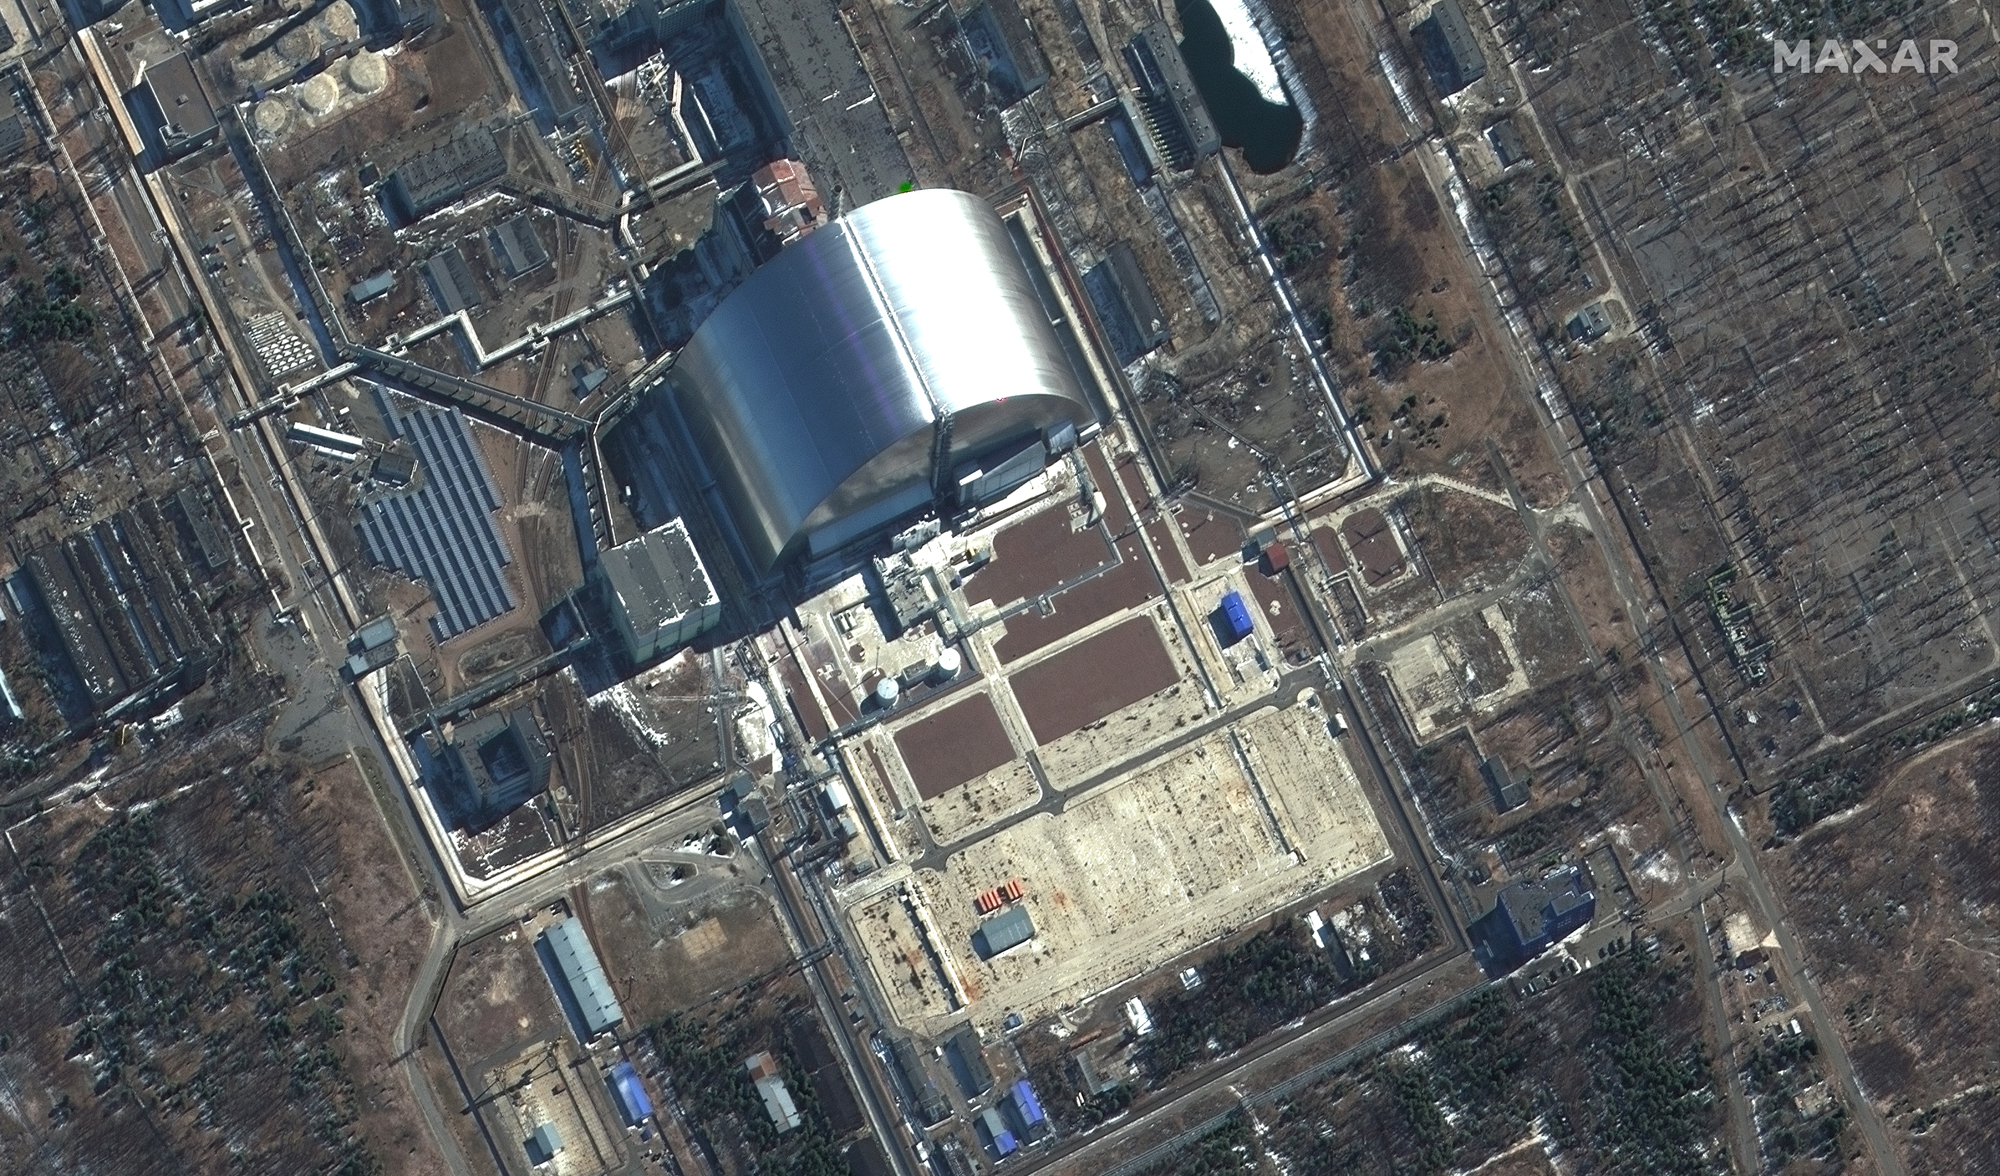 A close-up of the sarcophagus covering the Chernobyl nuclear power plant as seen by Maxar satellites on March 10, 2022.